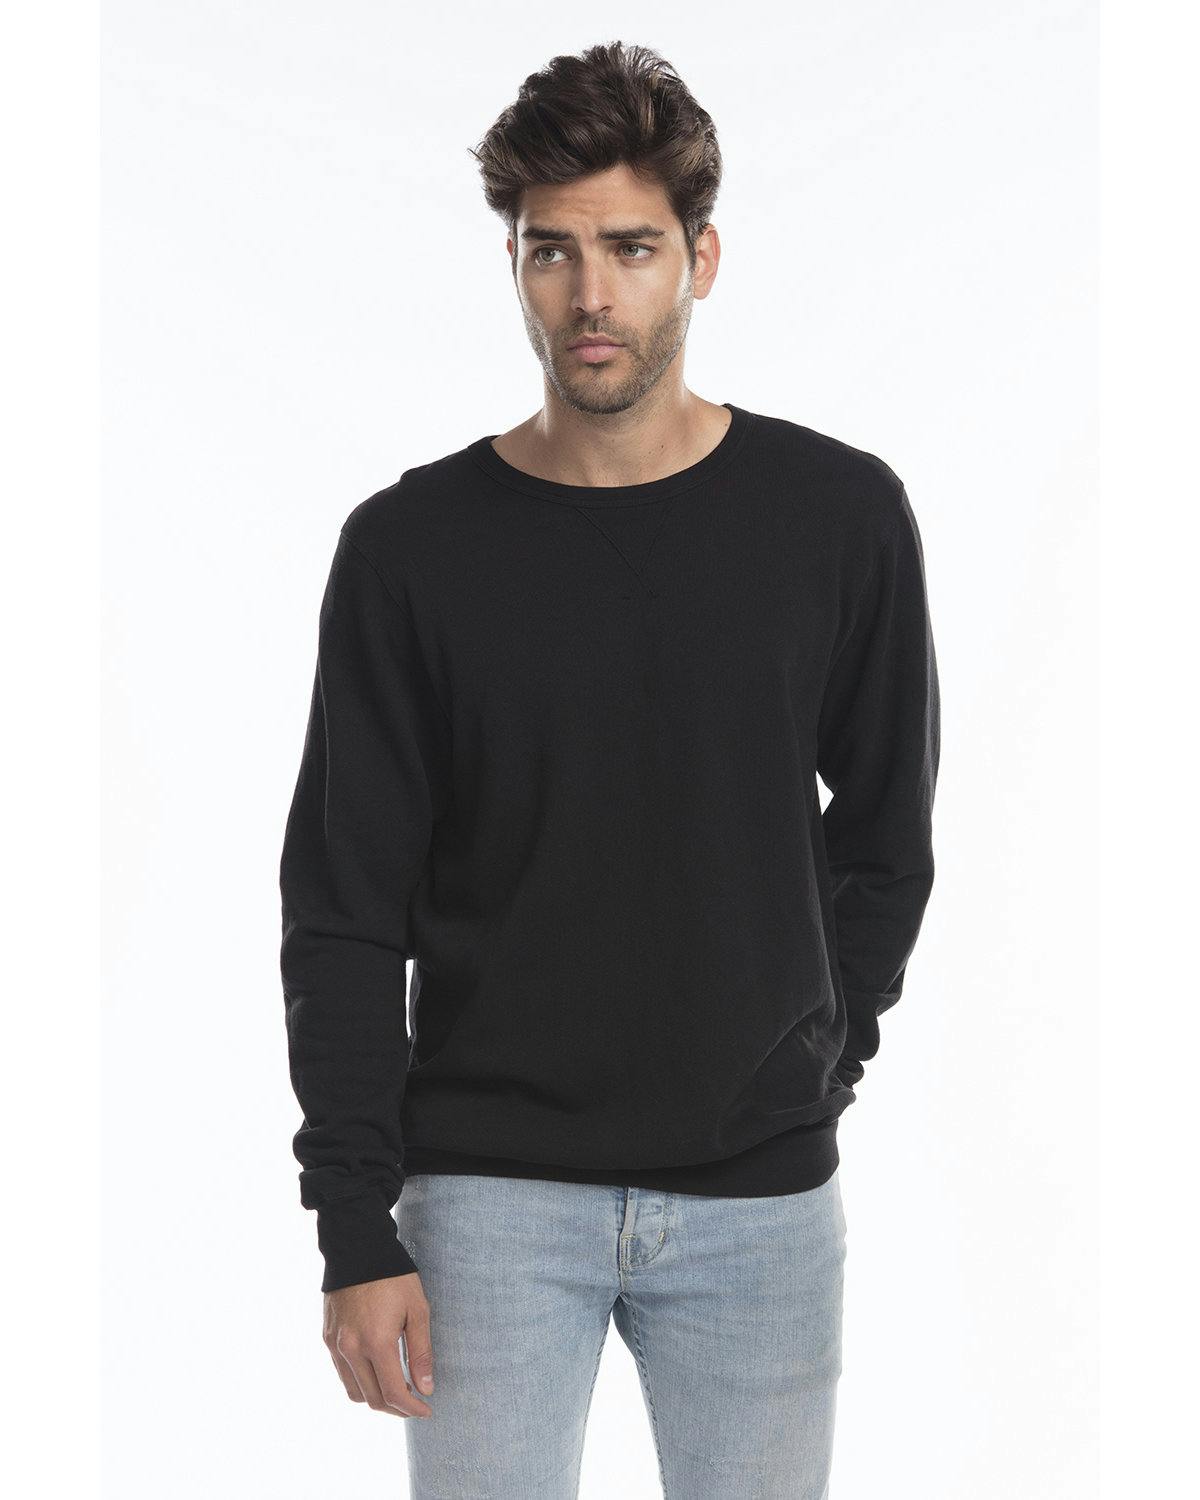 Image for Men's Garment-Dyed Heavy French Terry Crewneck Sweatshirt